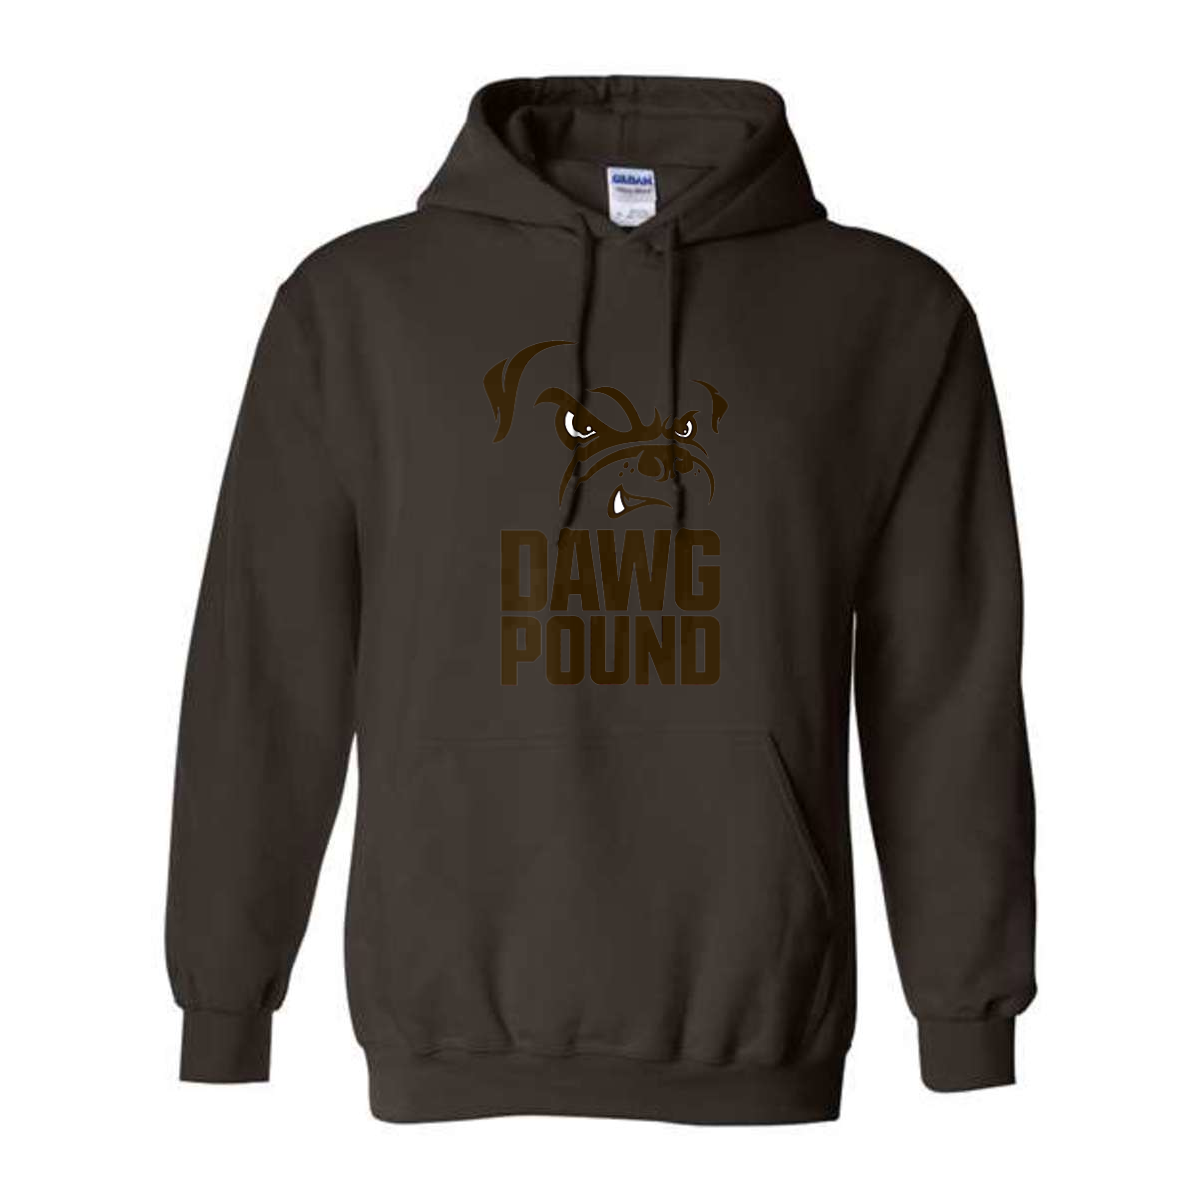 GT Top Dawg Pound Collection Hoodie